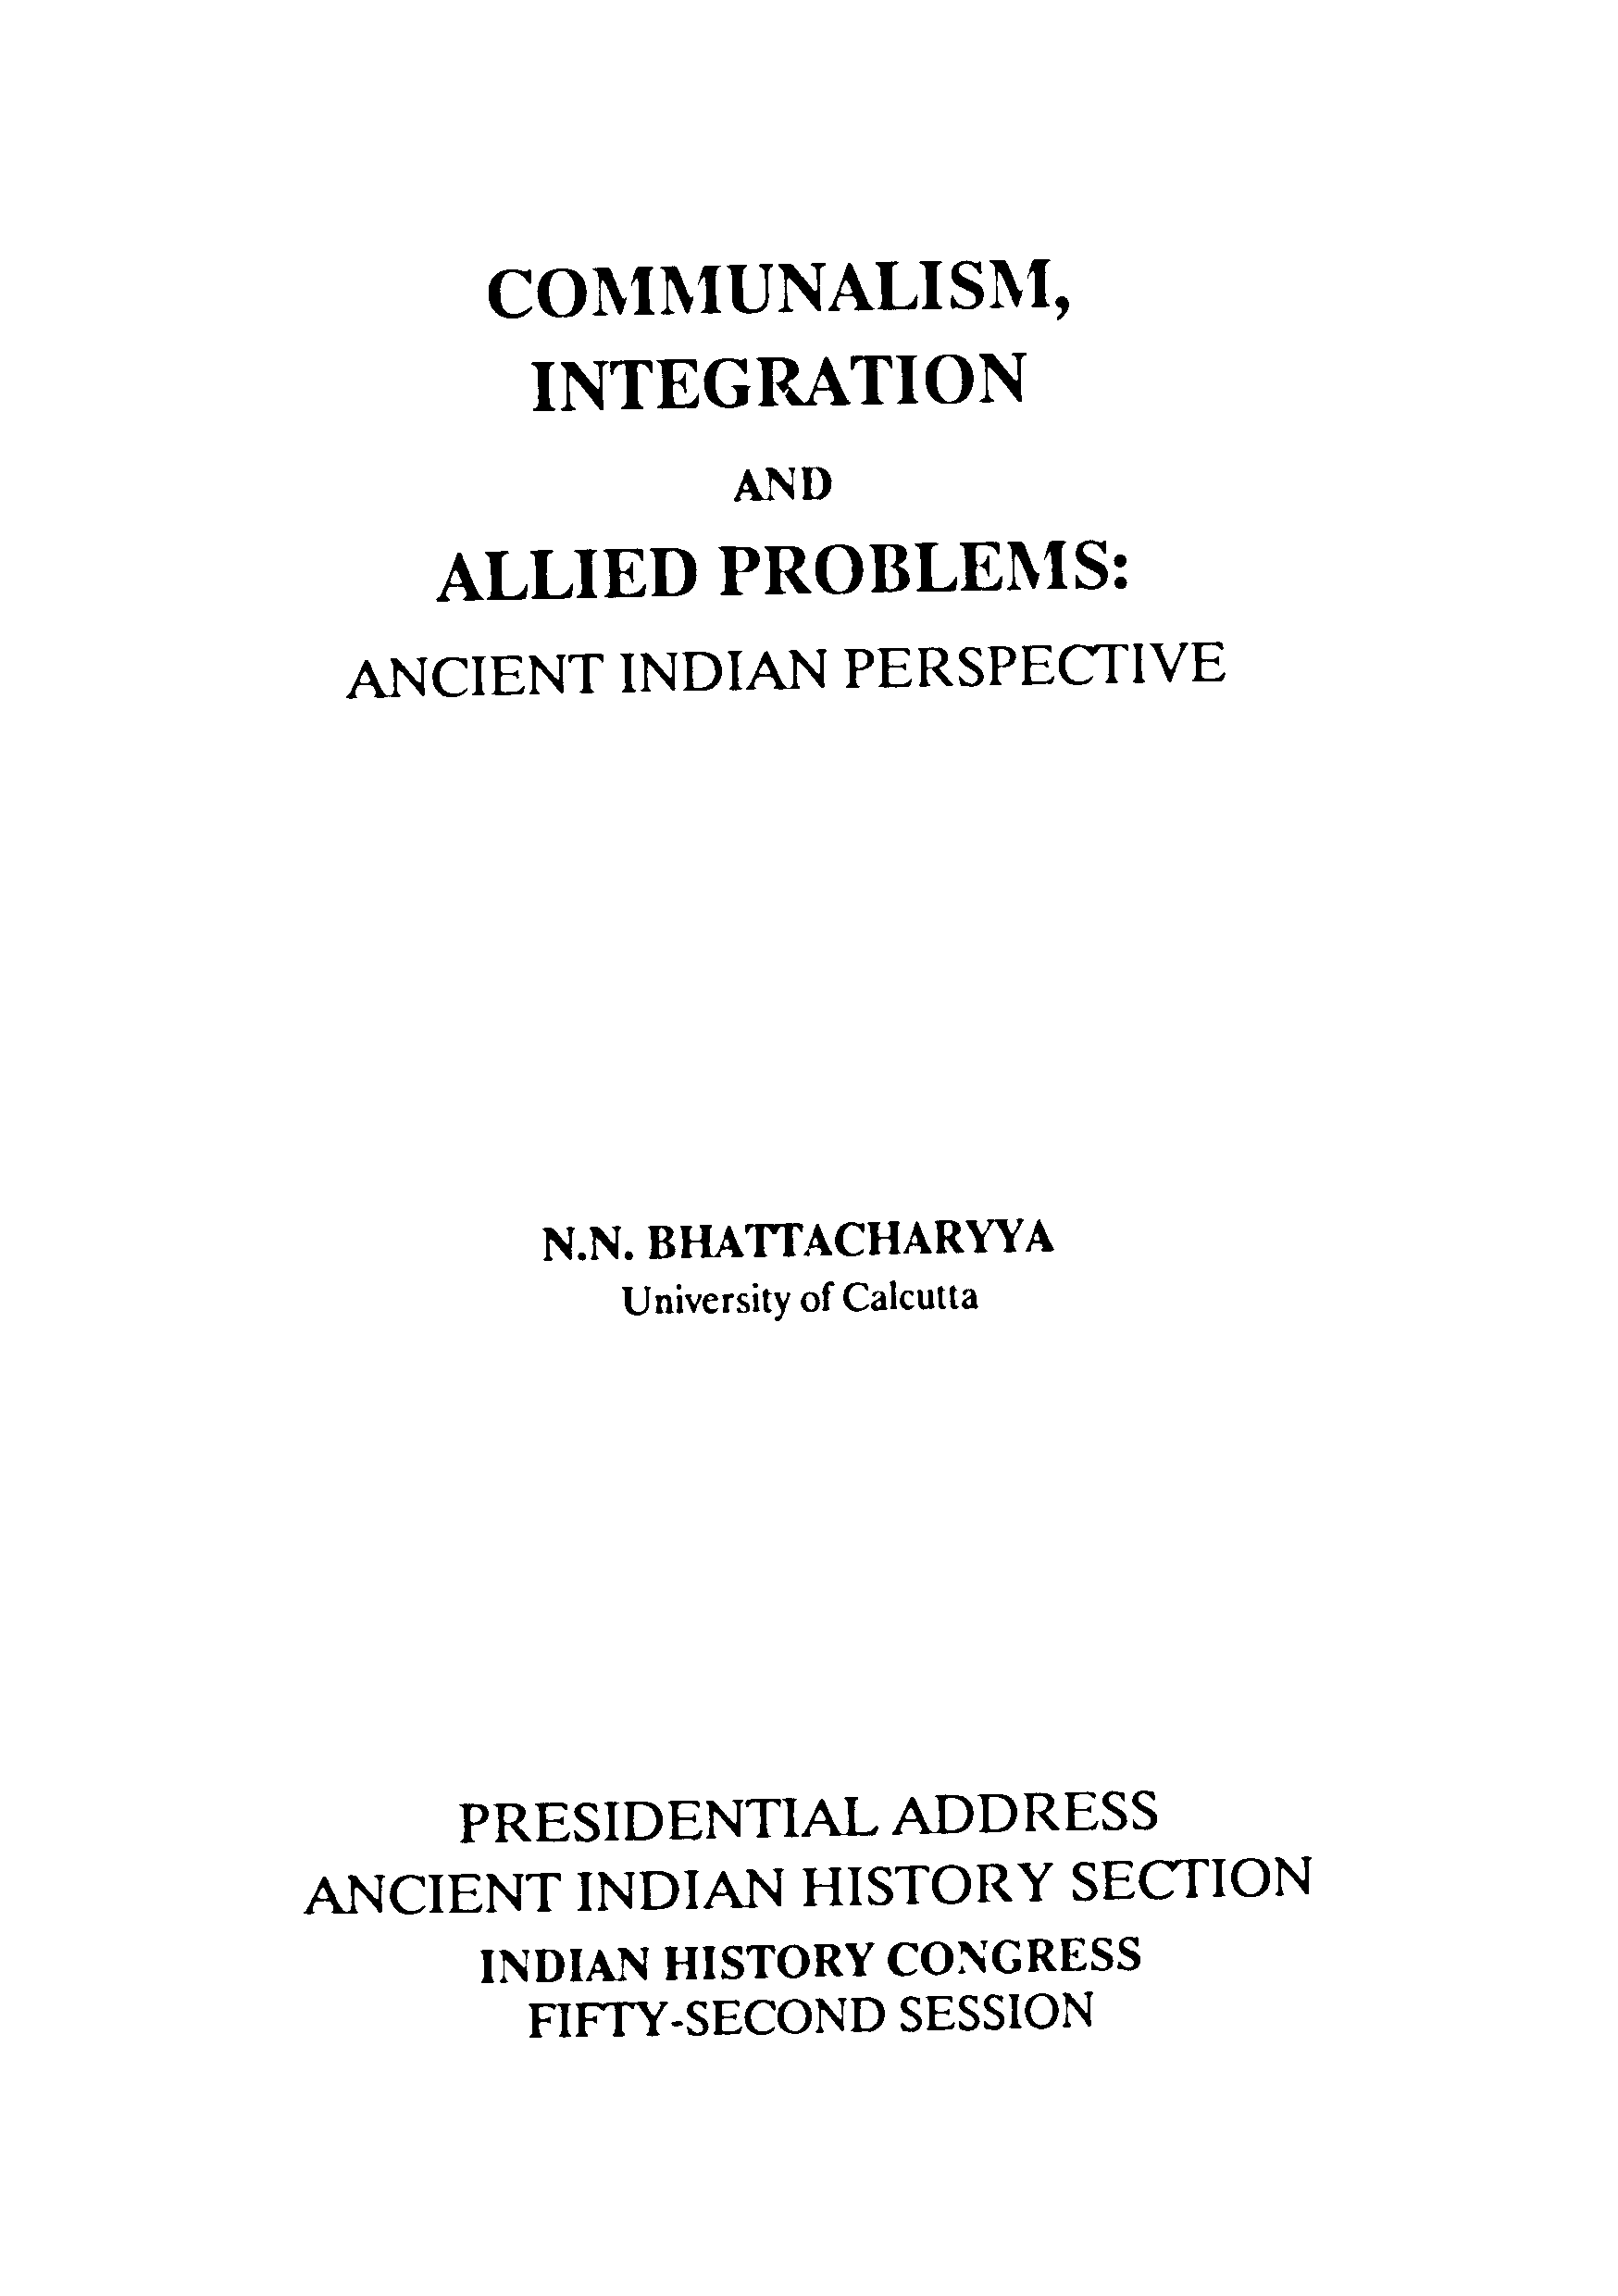 Communalism, Integration and Allied Problems ; Ancient Indian Perspective